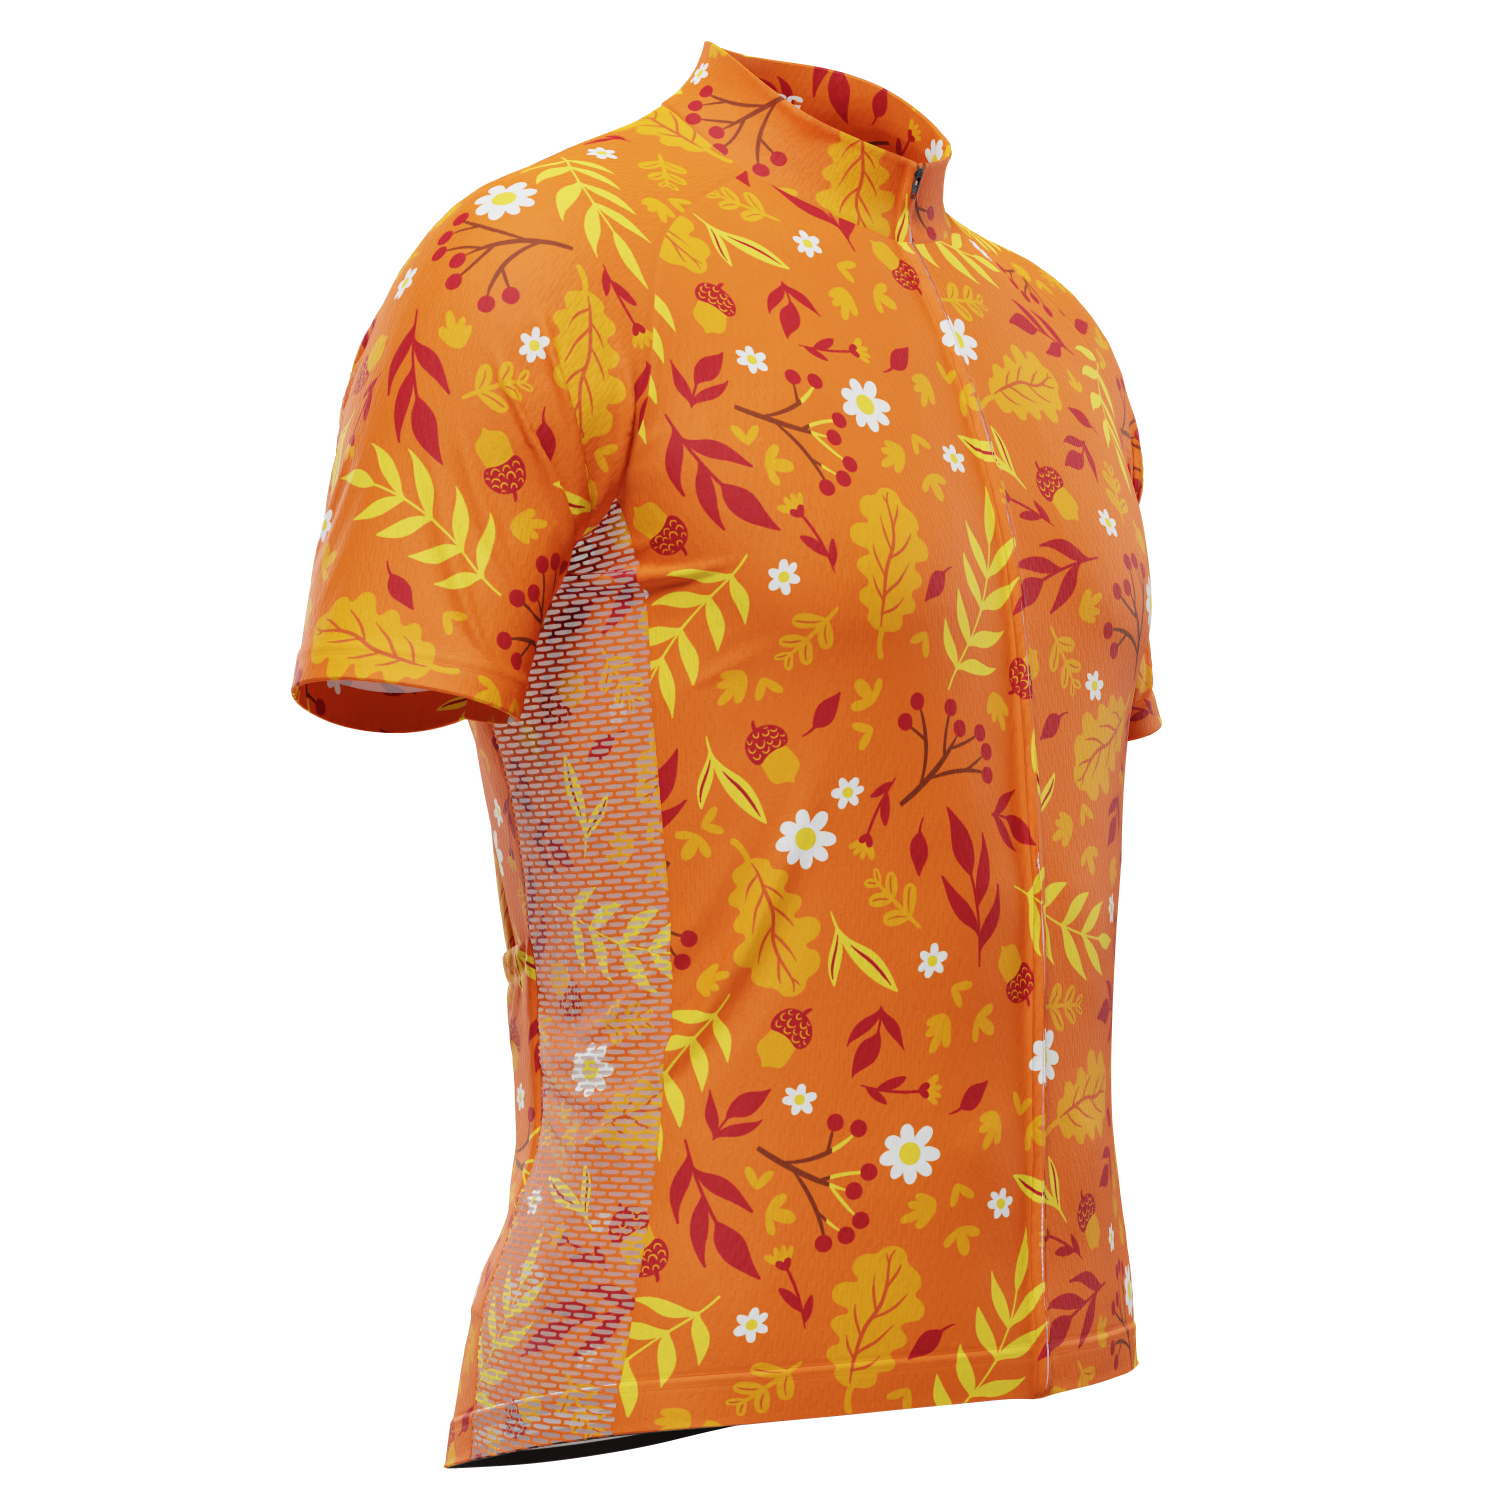 Men's Autumn Leaves Bright Short Sleeve Cycling Jersey